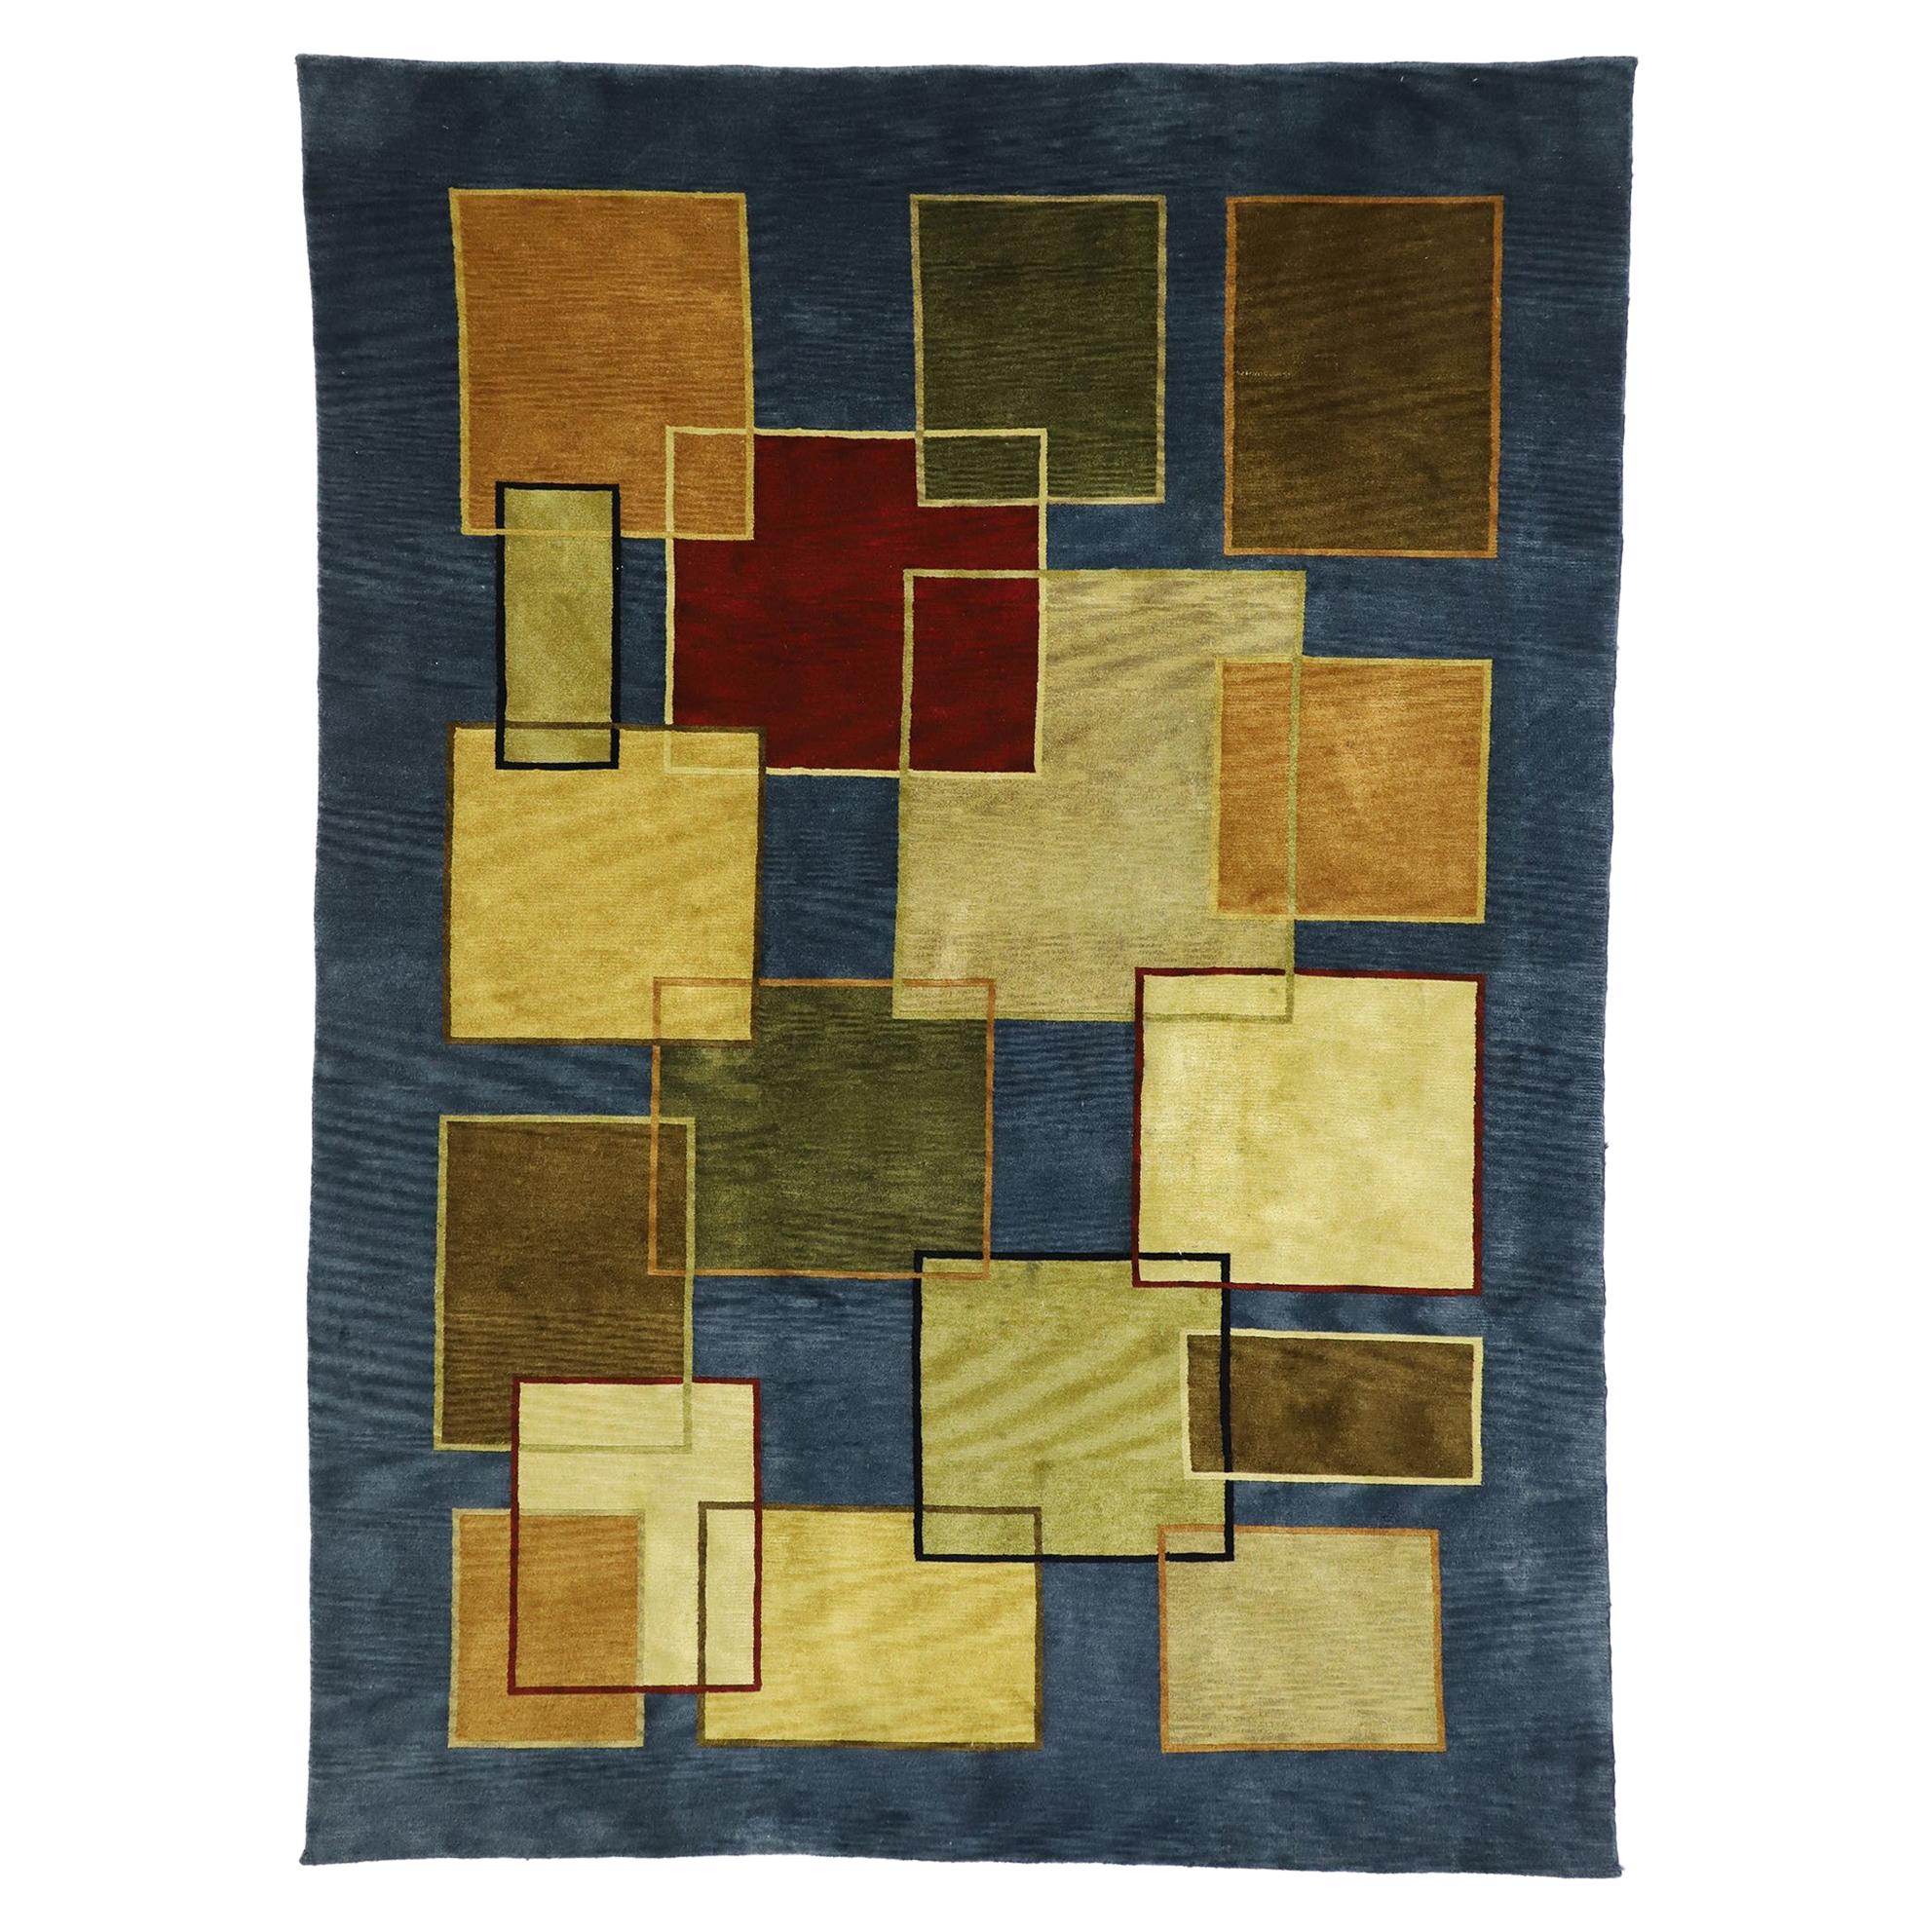 Vintage Mid-Century Modern Style Rug with Cubism and Bauhaus Design